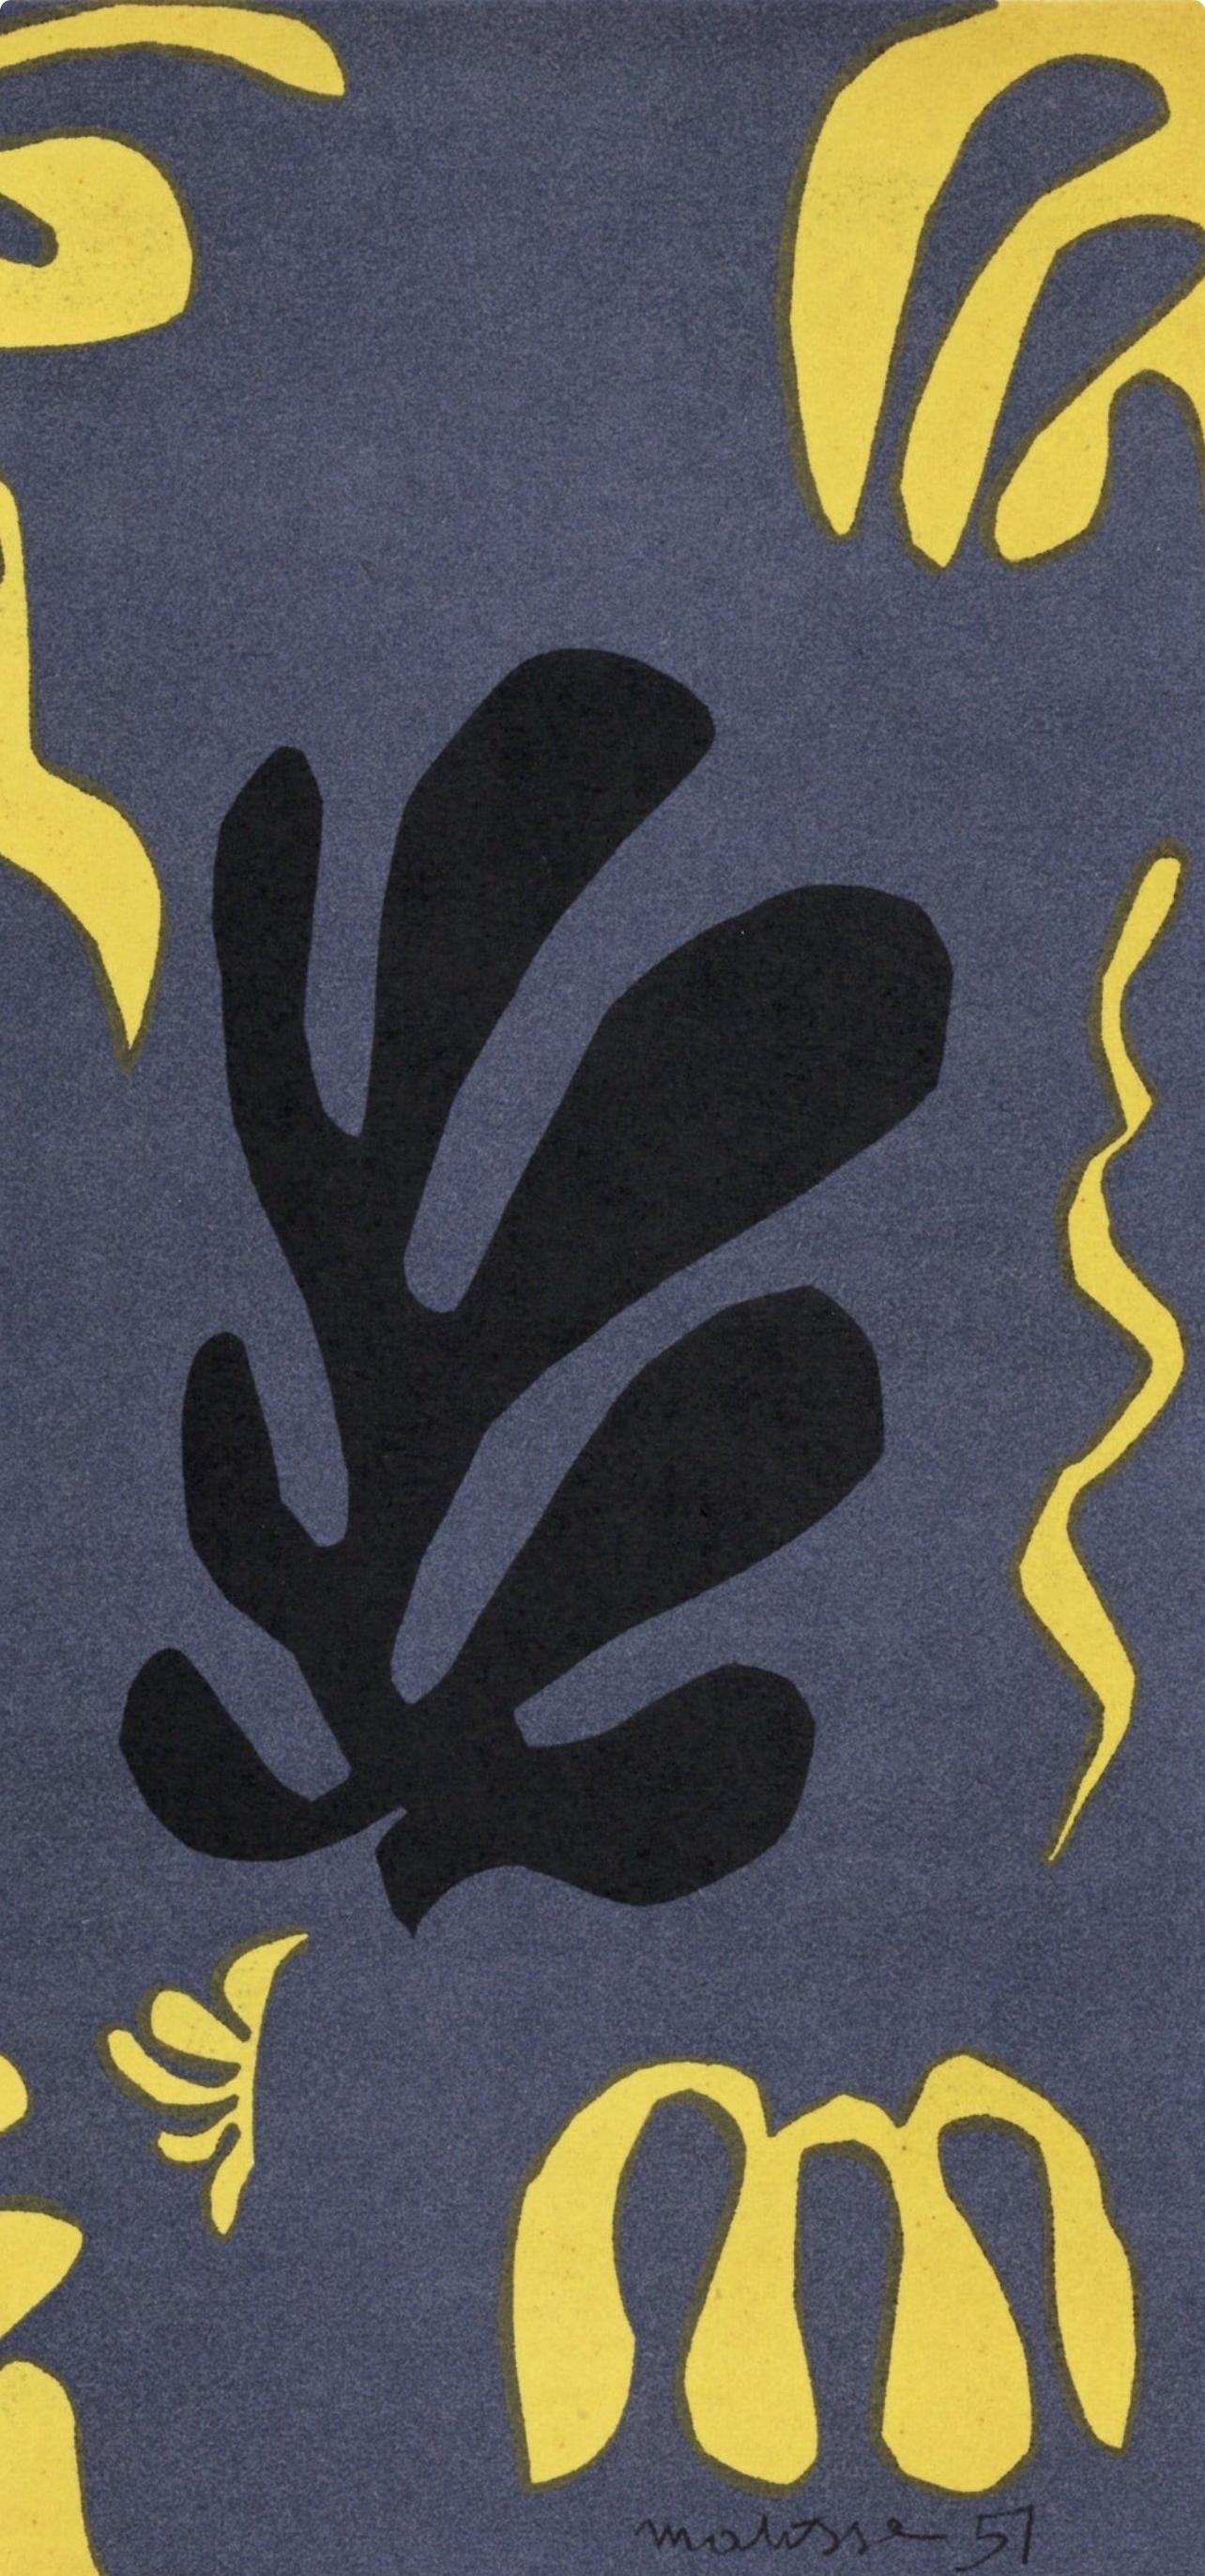 Matisse, Decoupage, XXe Siècle (after) - Print by Henri Matisse